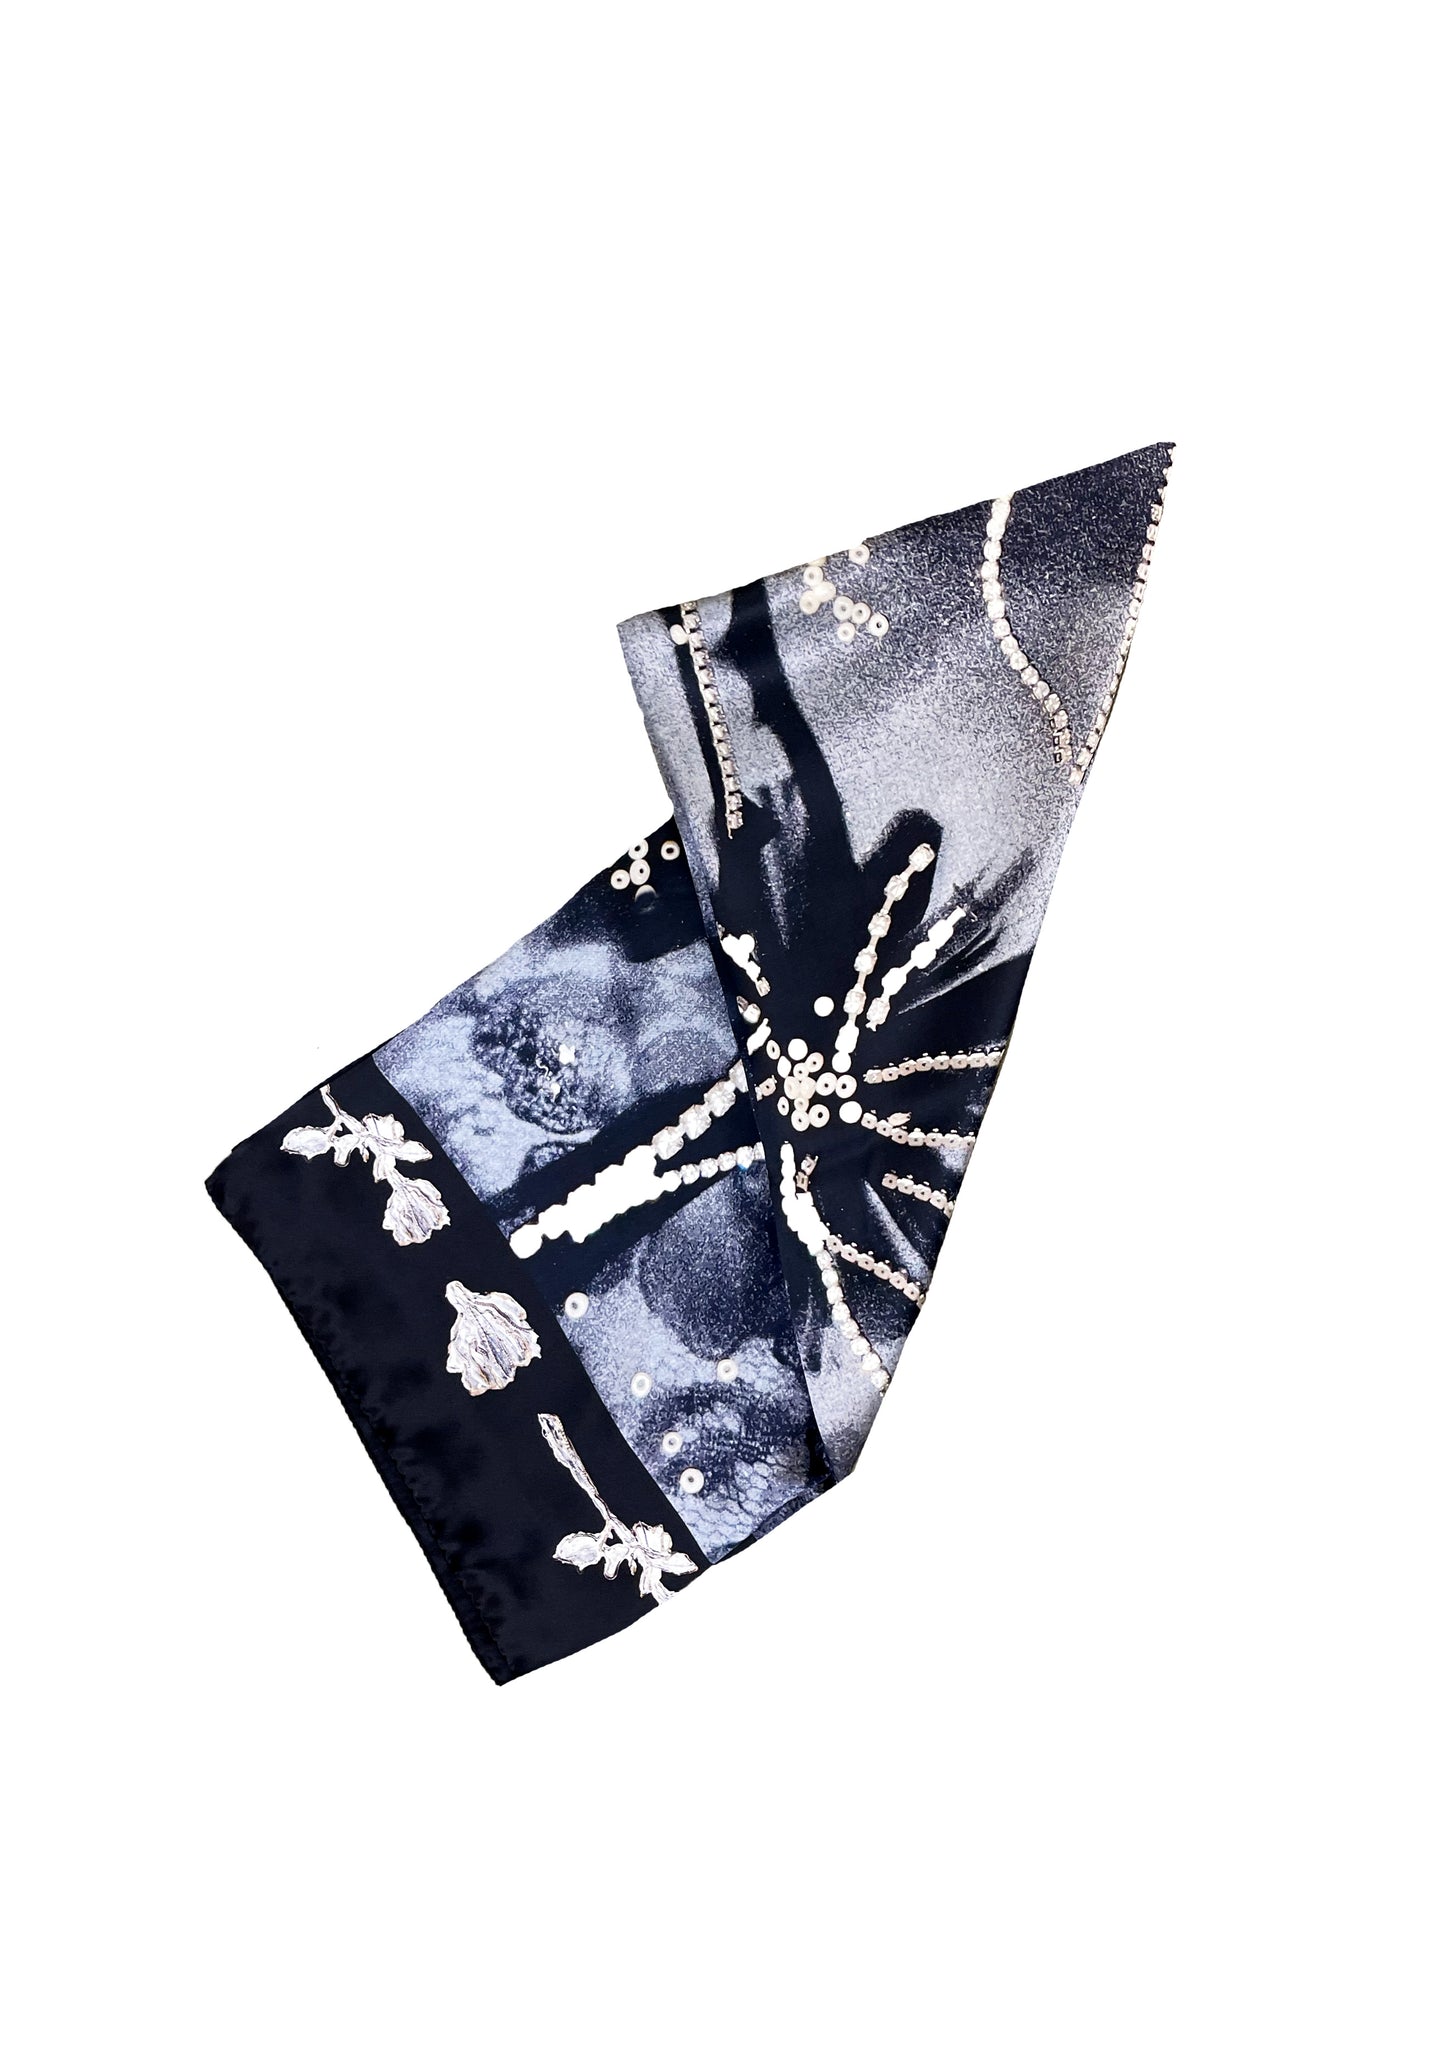 The Airbrush Lace Silk Scarf 130 x 130 cm